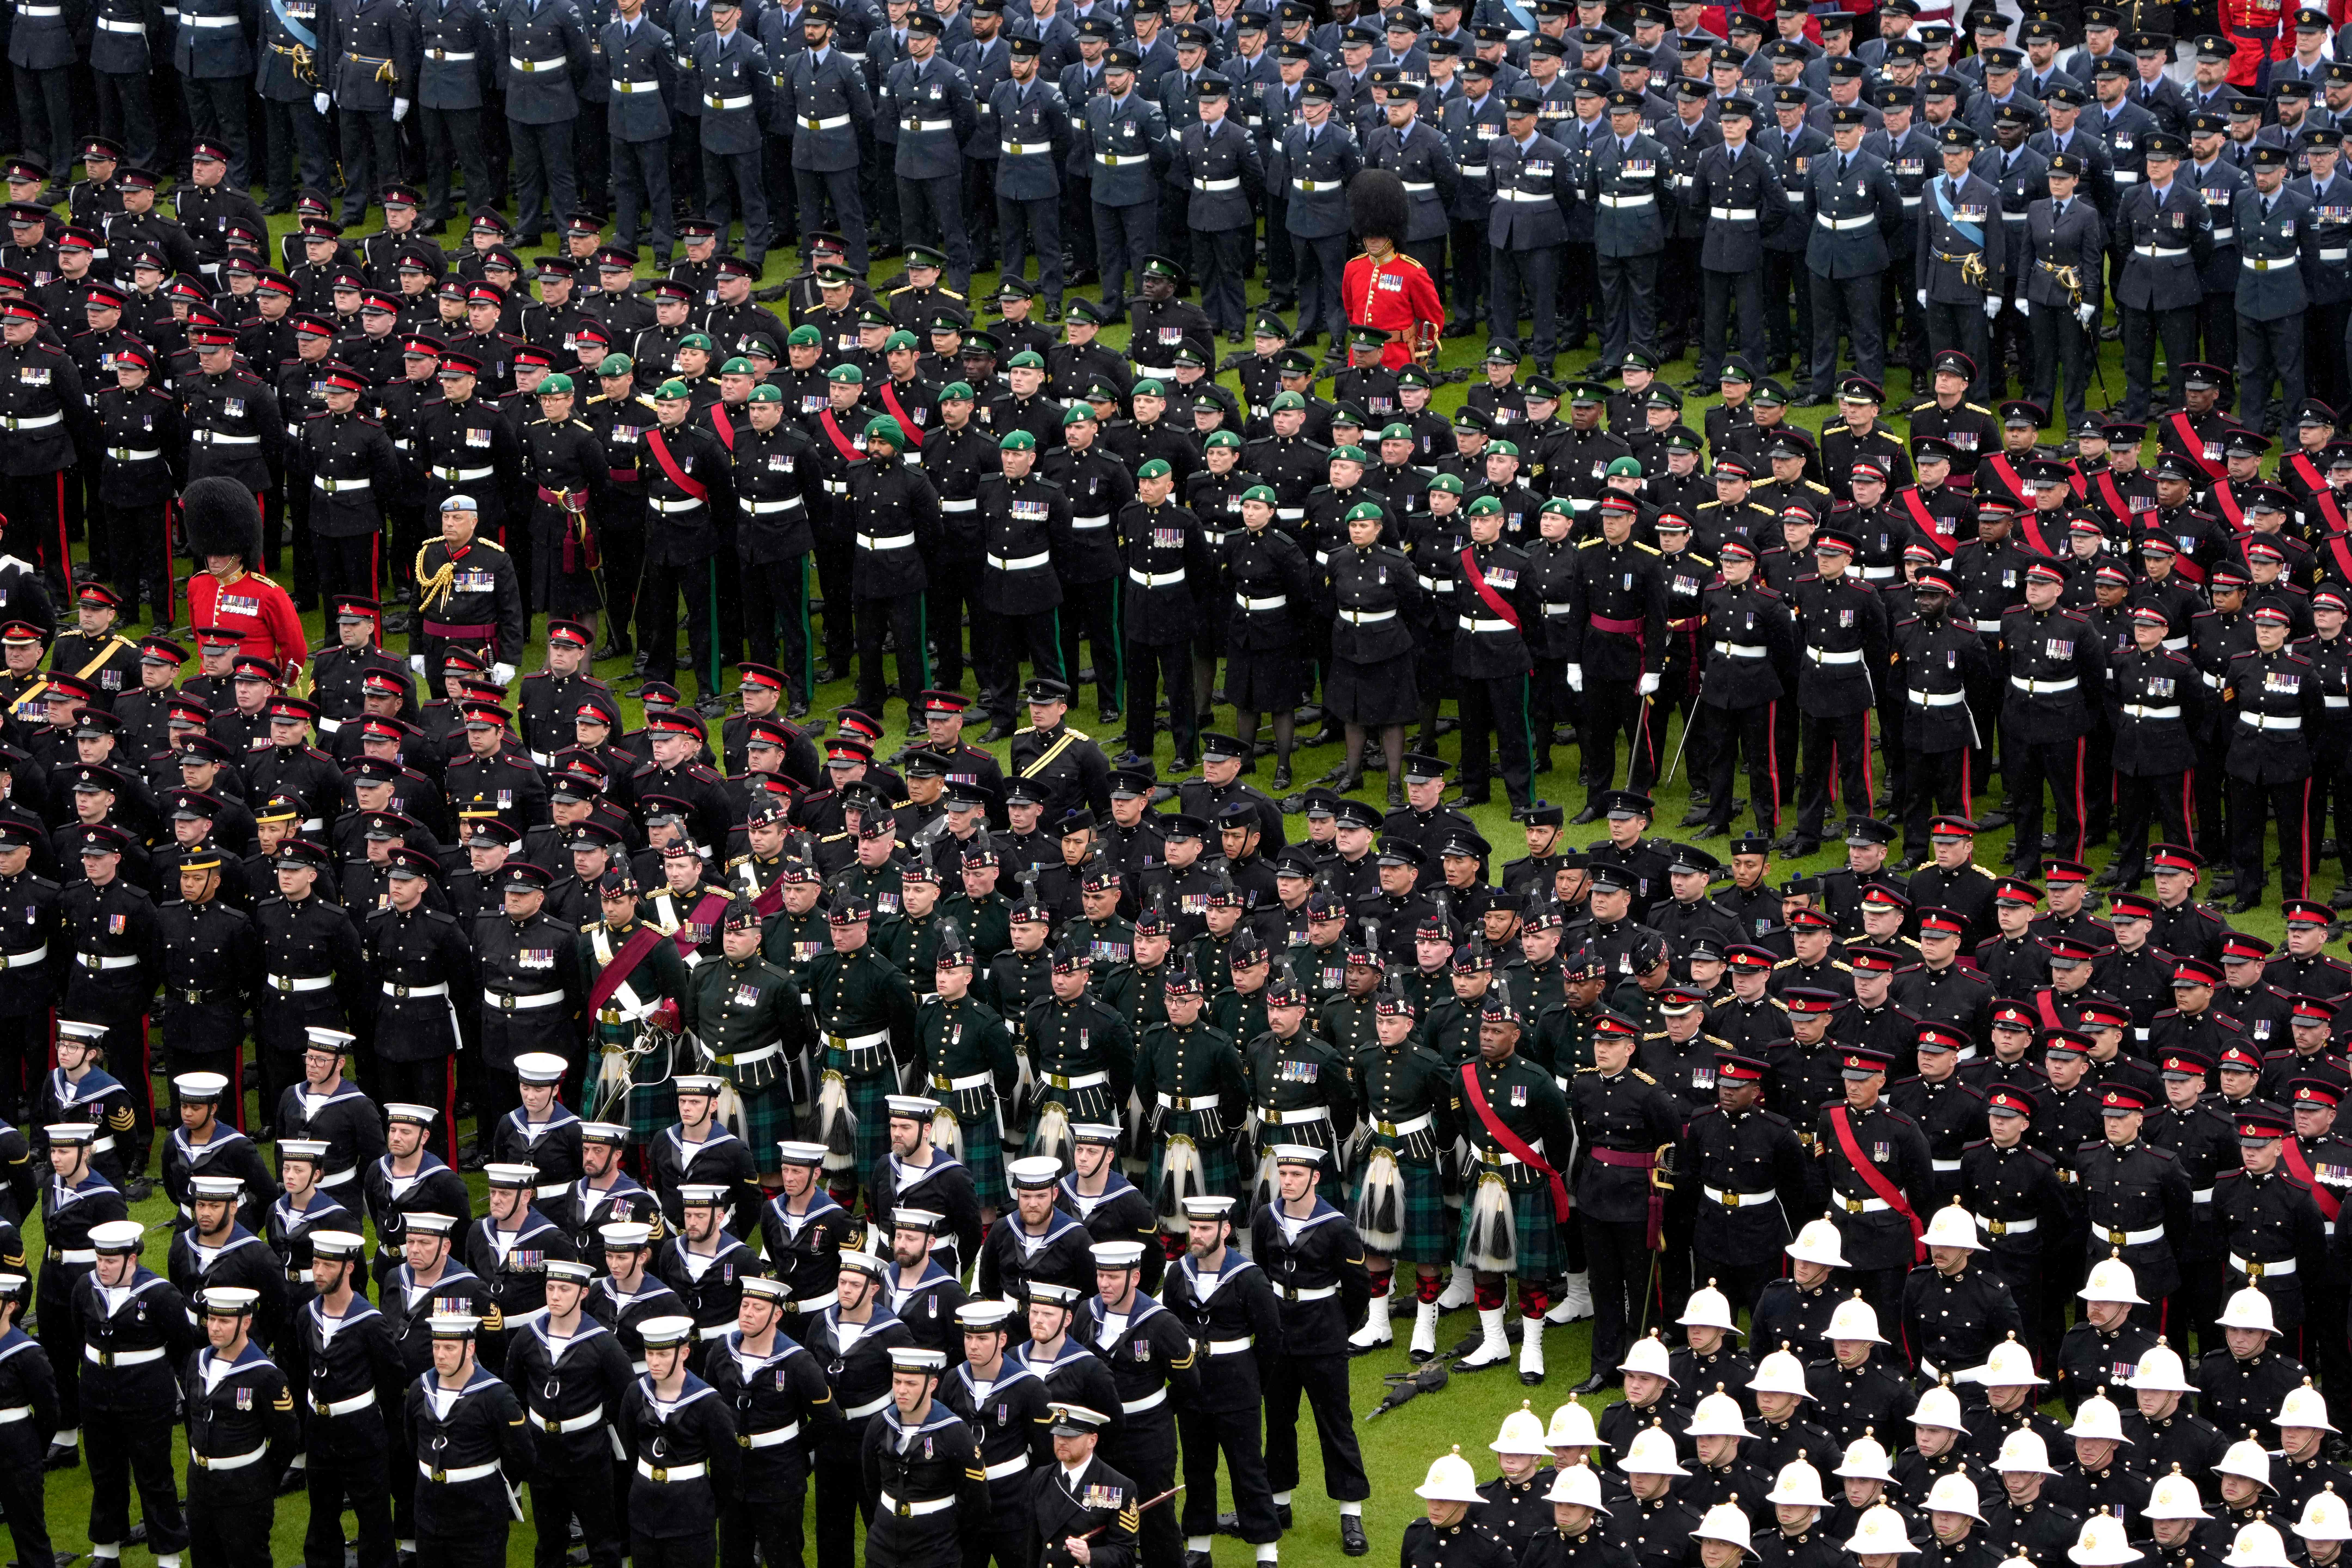 London: 4 thousand military personnel participated in the parade ceremony in front of Buckingham Palace